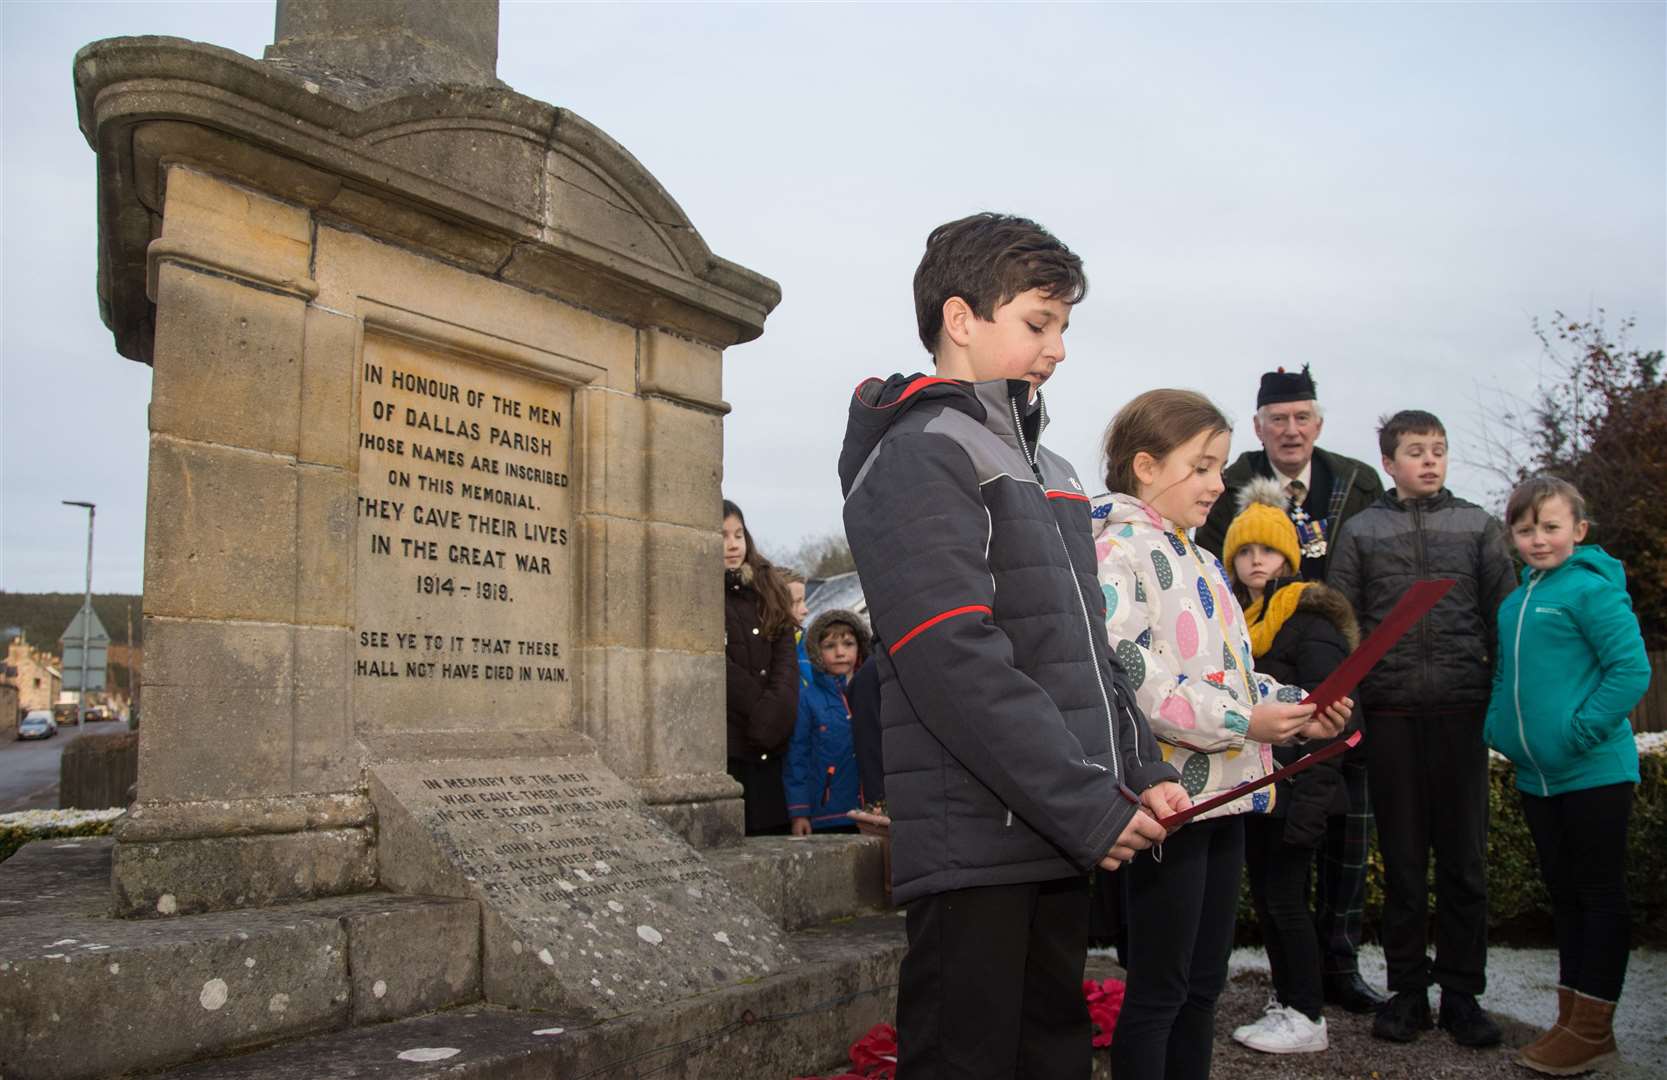 This War Memorial was ultimately built in Dallas. Pupils from the village's primary school are pictured honouring those who died in the conflict. Austin Davis and Eva Landy read out a poem in their memory. Photograph by Becky Saunderson.